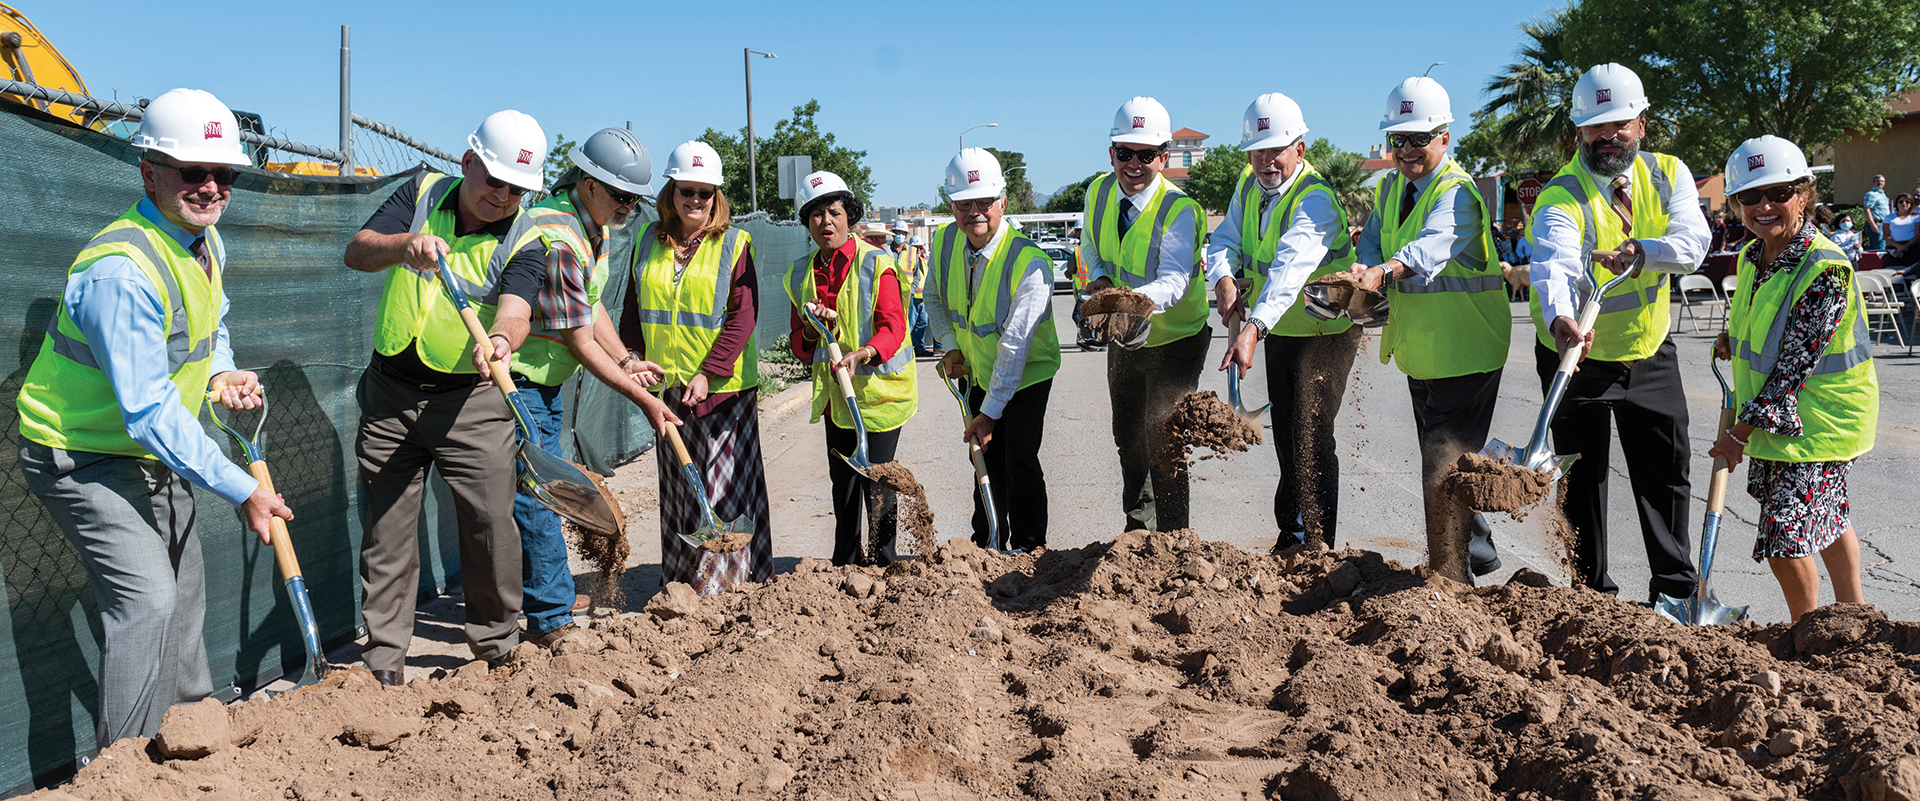 A group of people break ground